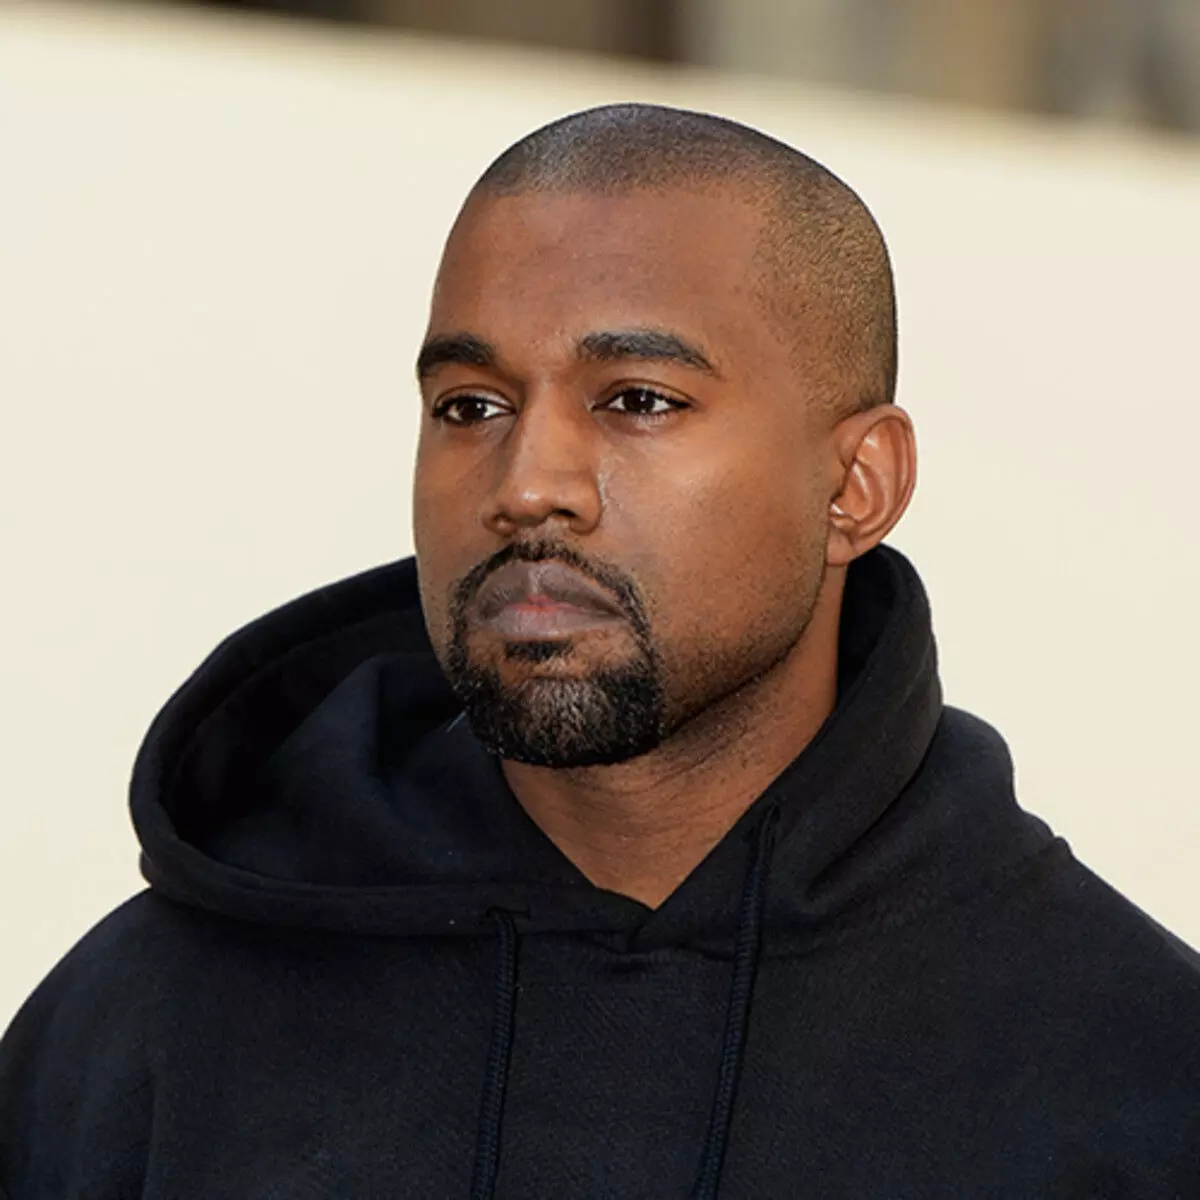 Kanye West announces U.S. presidential ambition